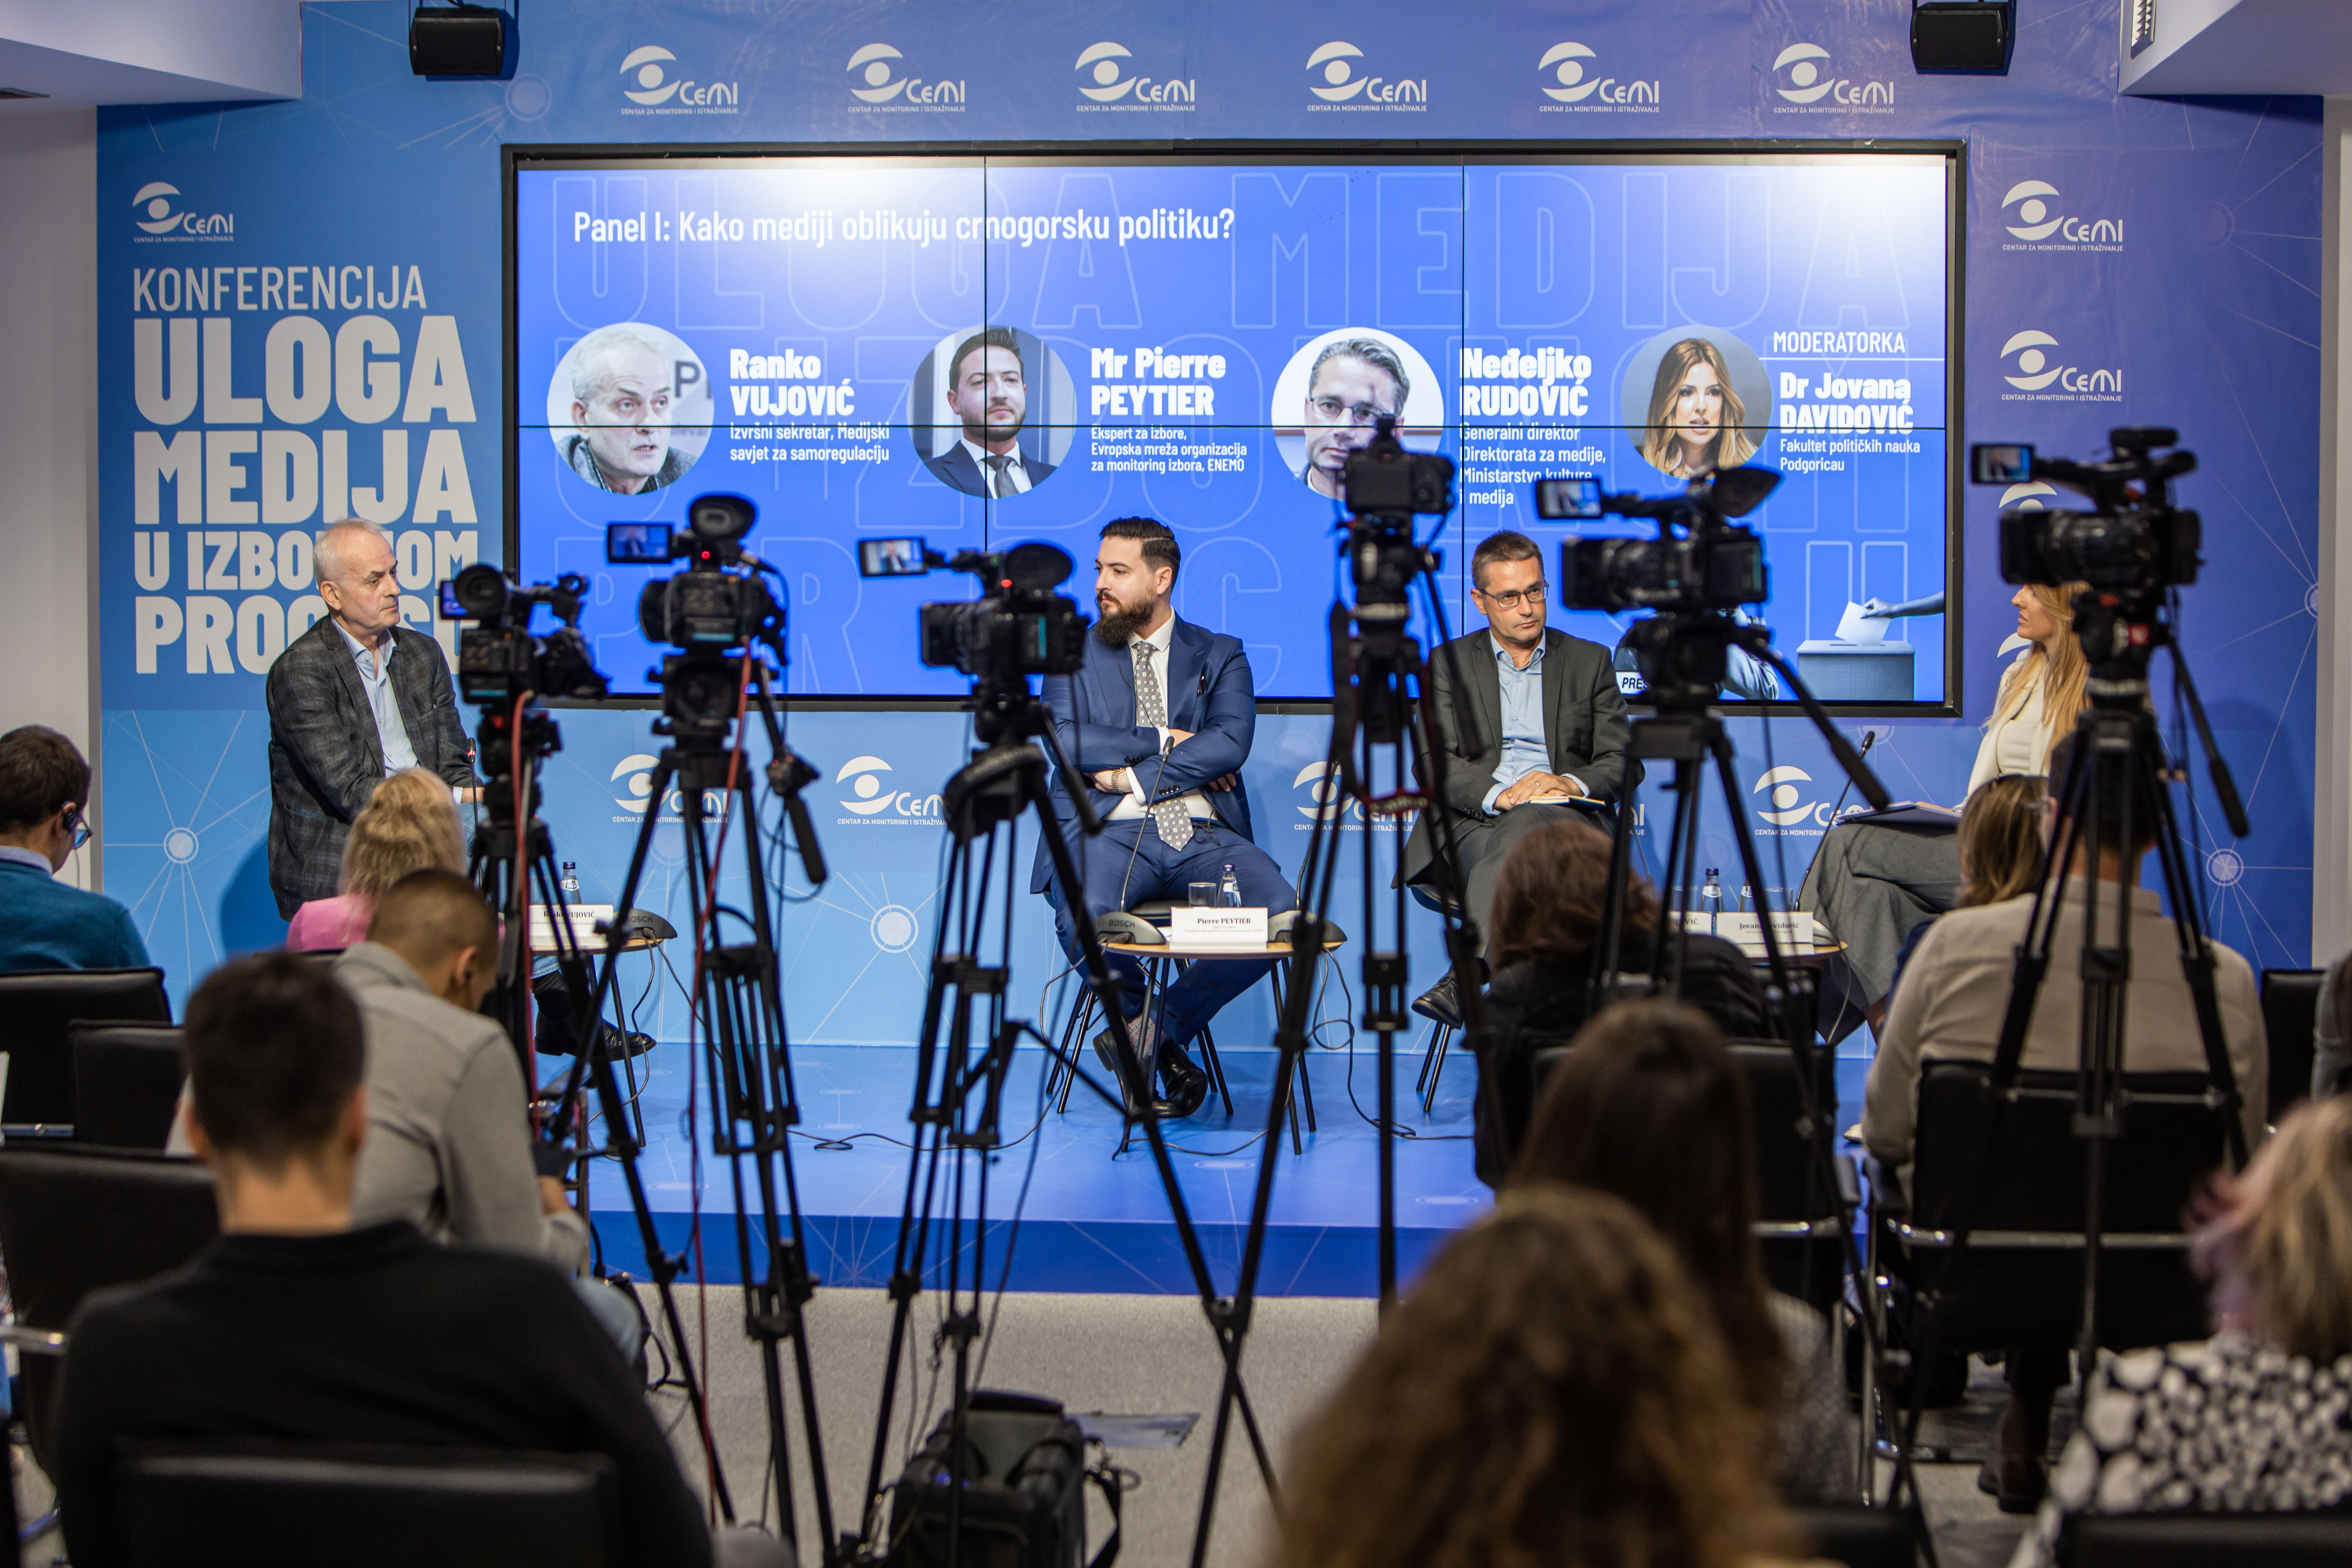 The Role of Media in the Electoral Process in Montenegro (II panel)